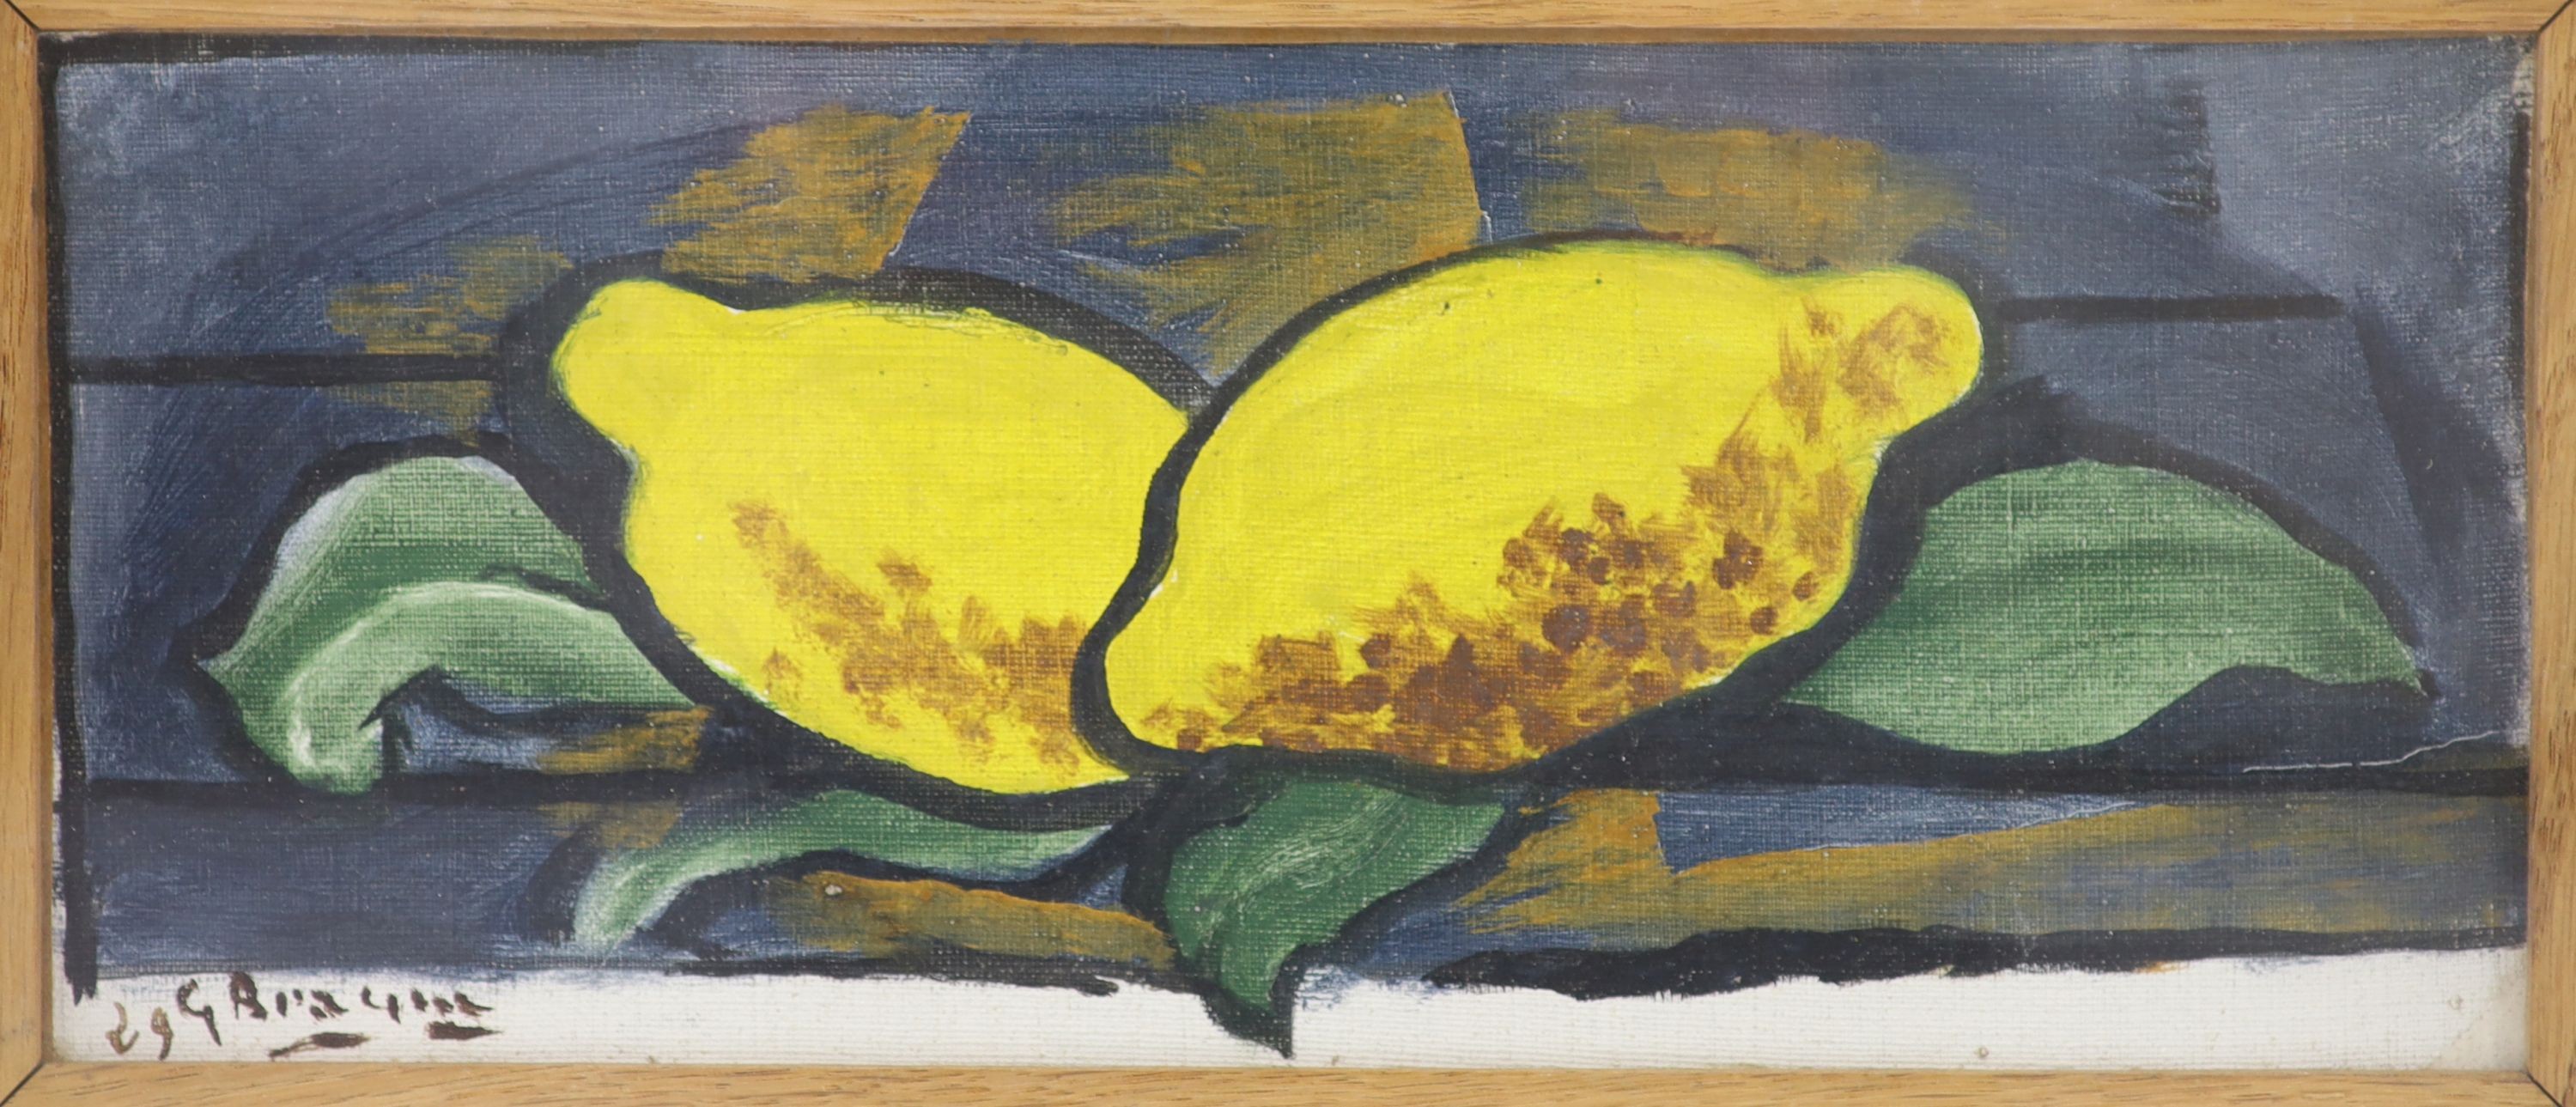 Georges Braque (French, 1882-1963), 'Two Lemons', 1929, oil on canvas, 13 x 29.5cm